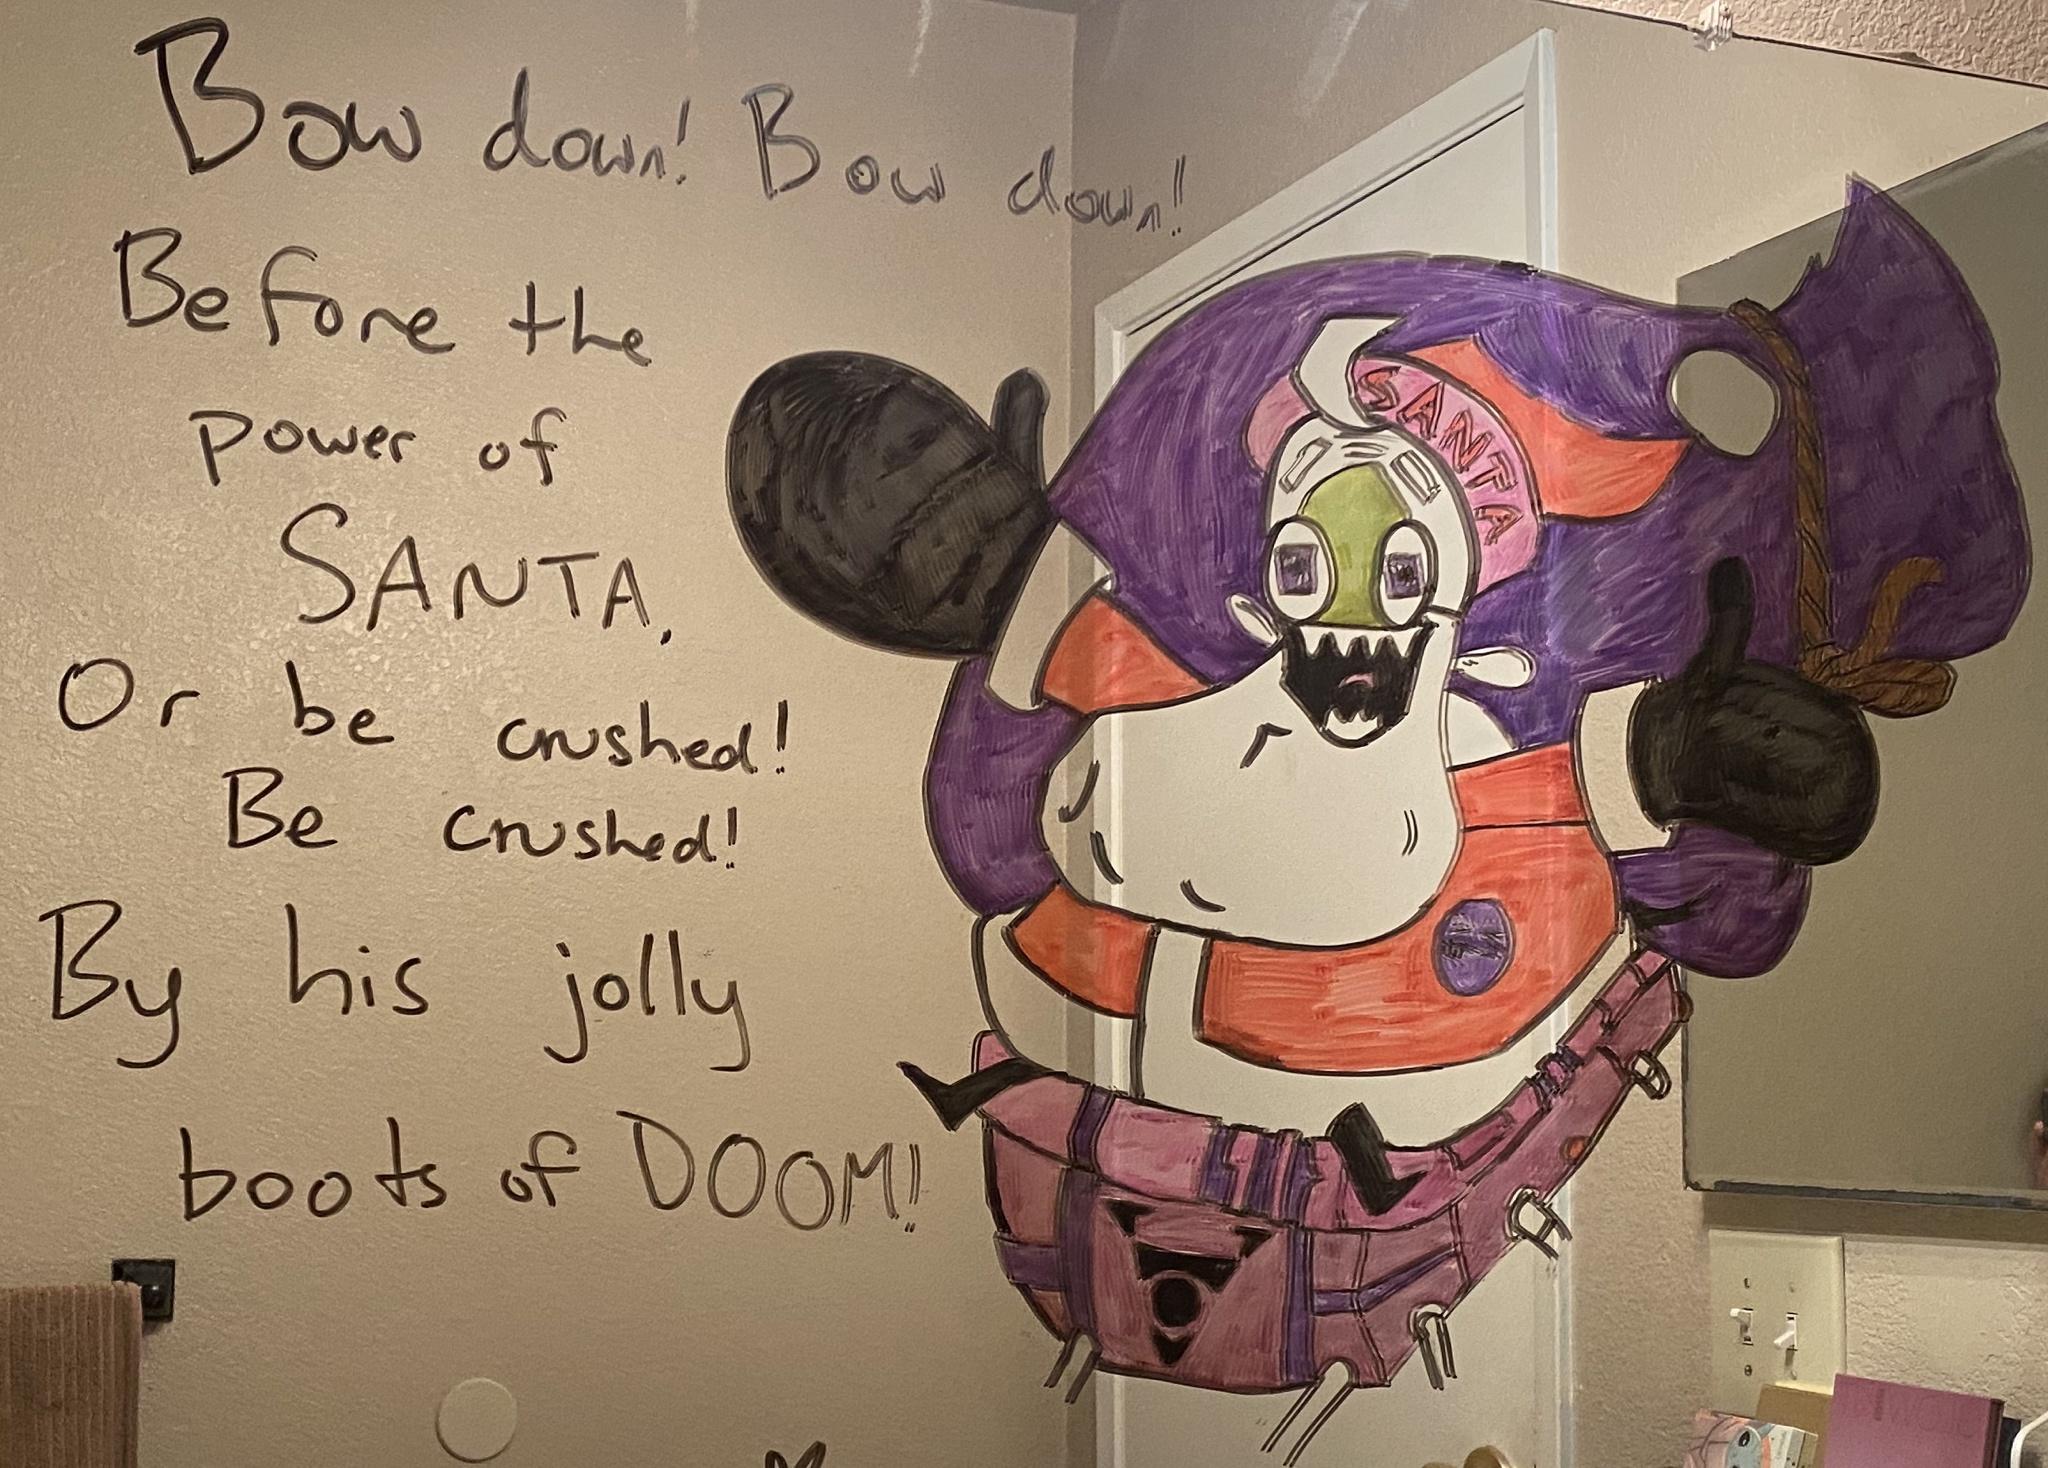 cartoon - Bow down! Bow down Before the power of Anda Santa, Or be crushed! Be crushed! By his jolly boots of Doom!